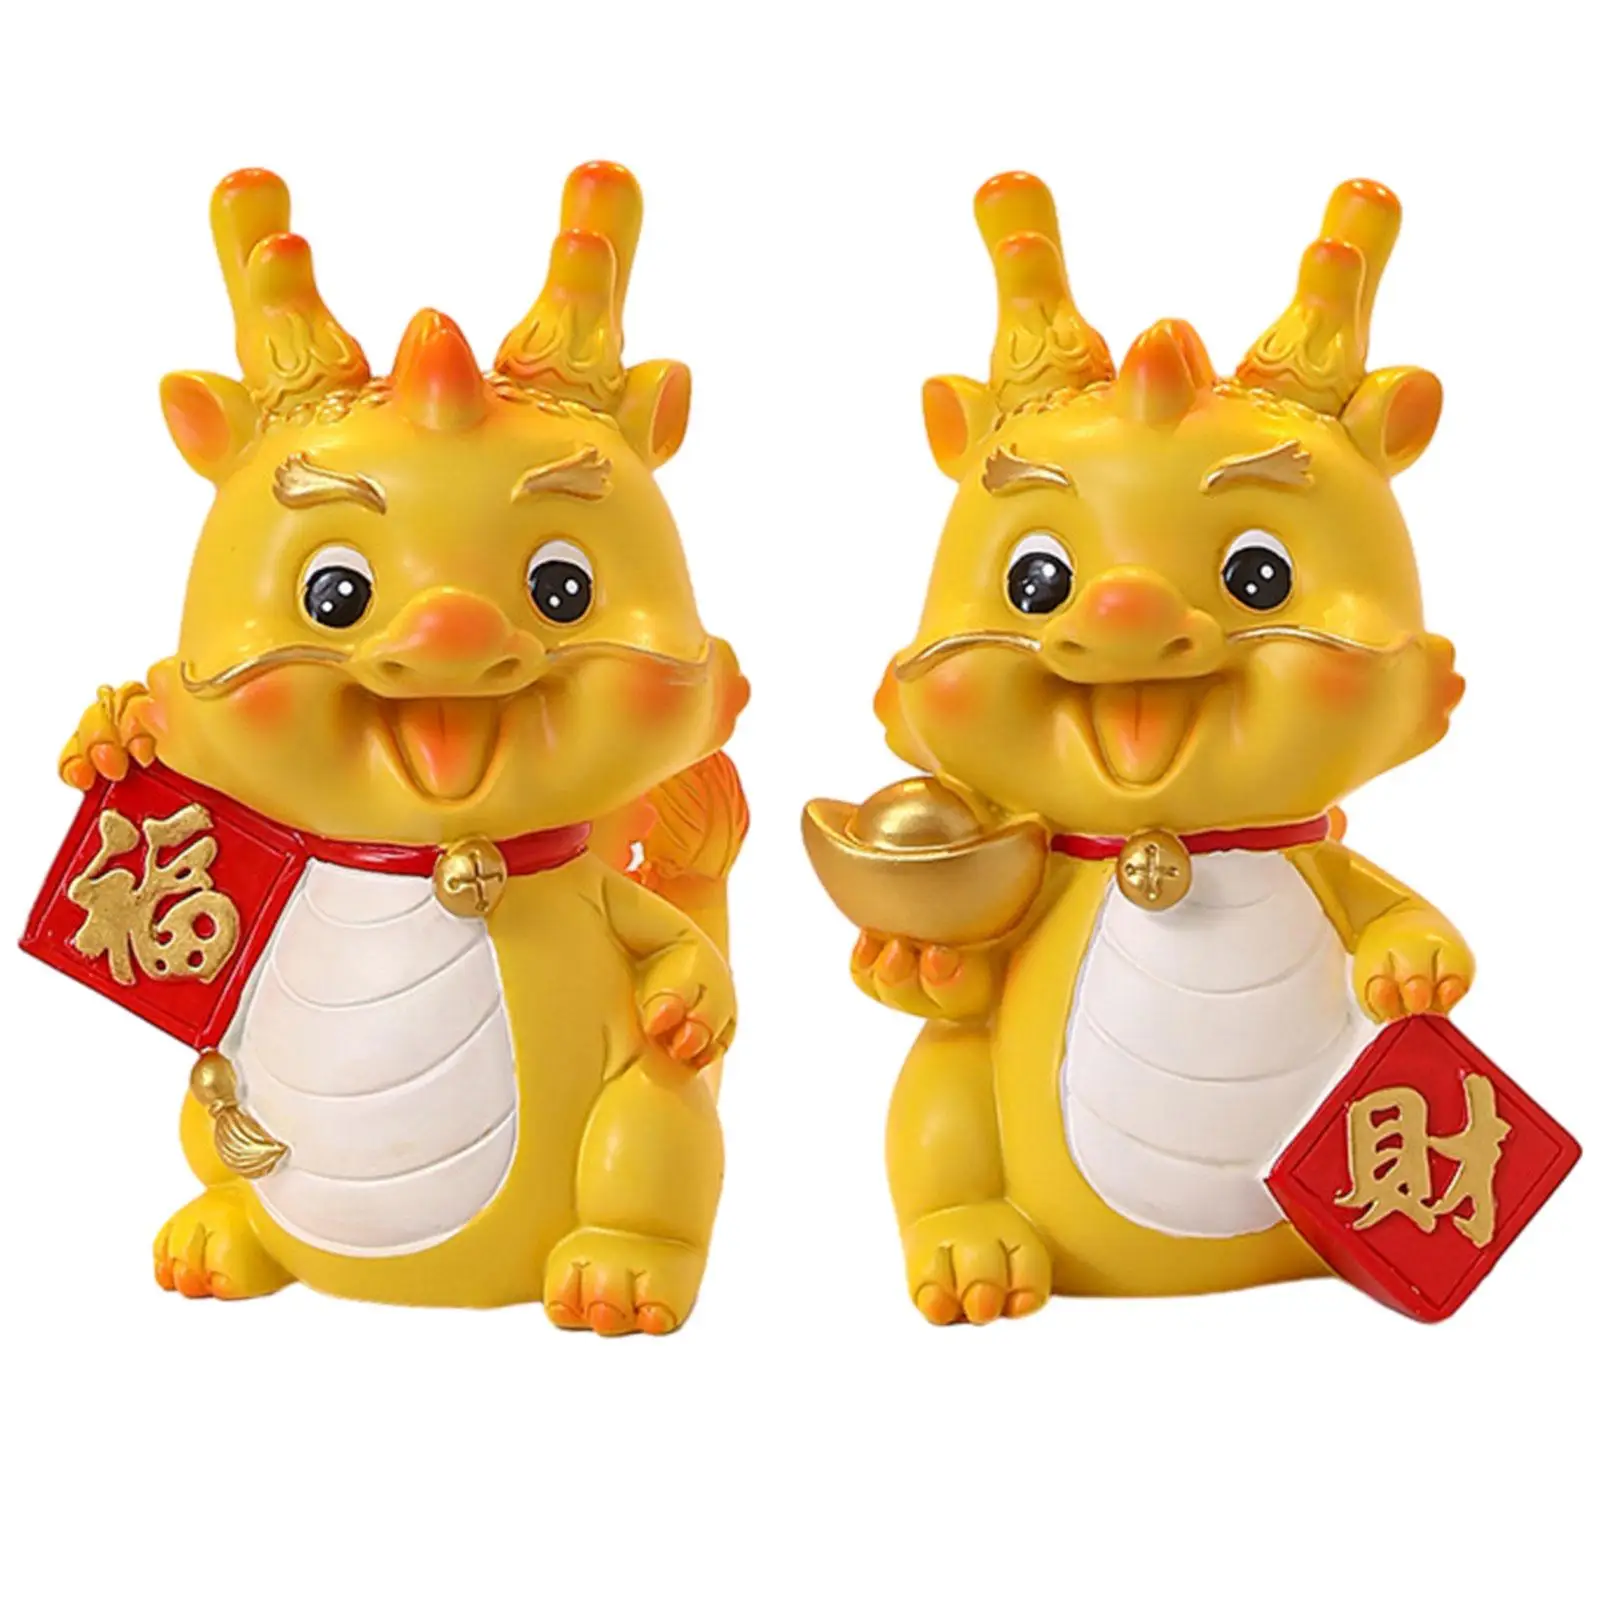 Dragon Statue Money Bank Sculpture for Apartment Restaurant New Year Gifts